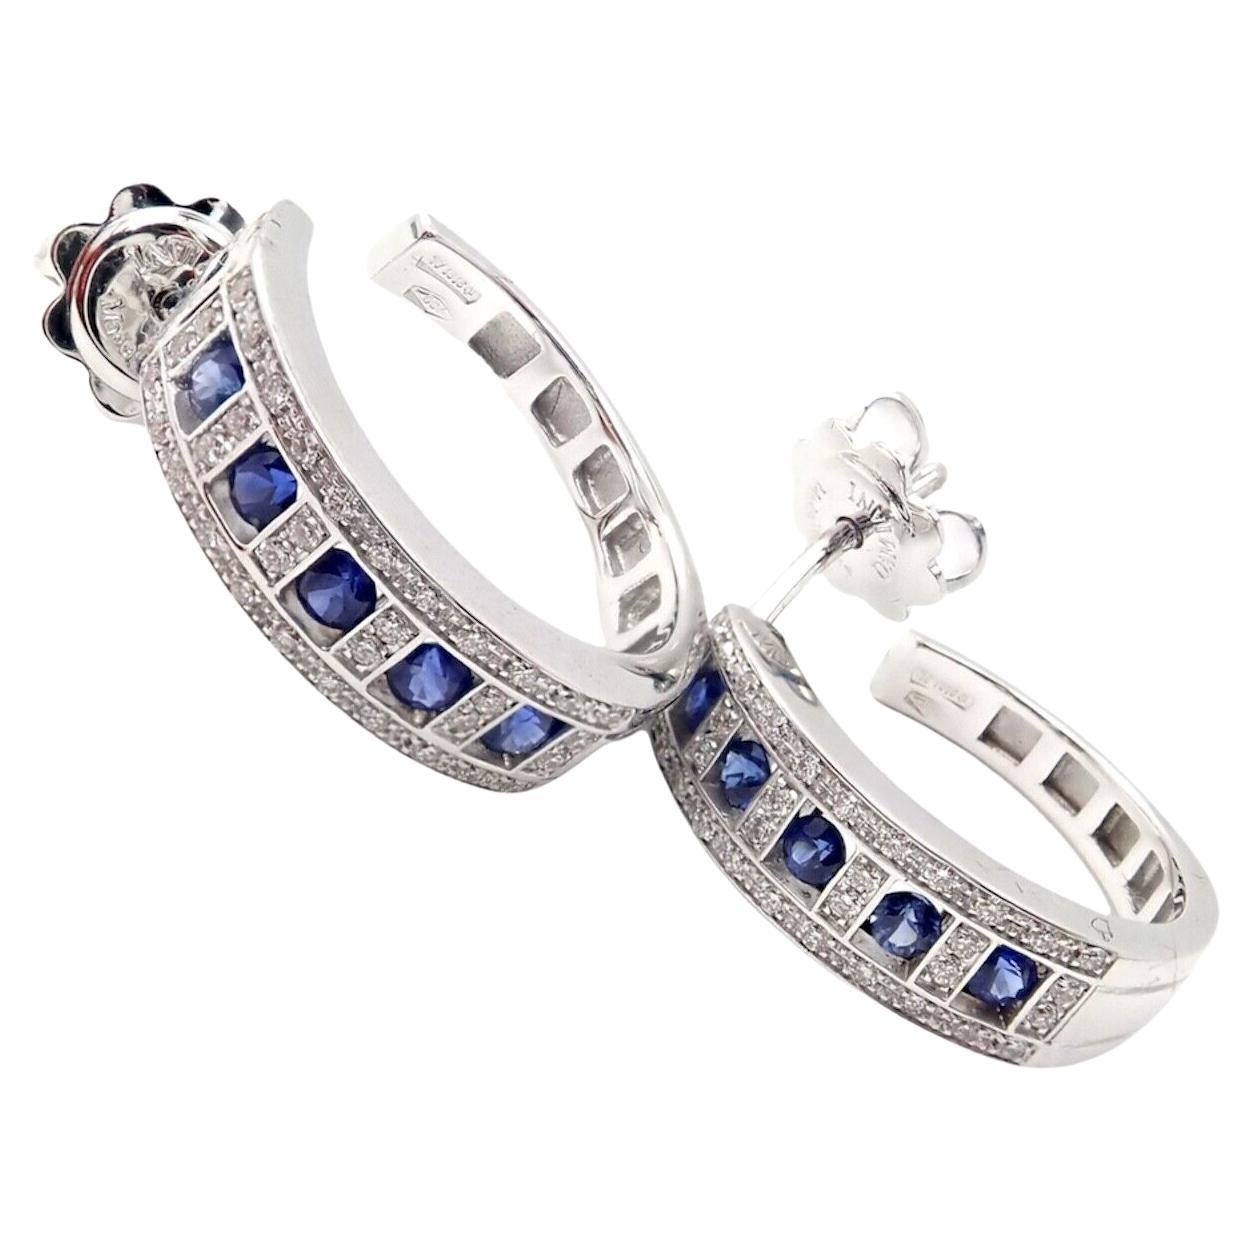 Damiani Belle Epoque Diamond and Sapphire White Gold Hoop Earring